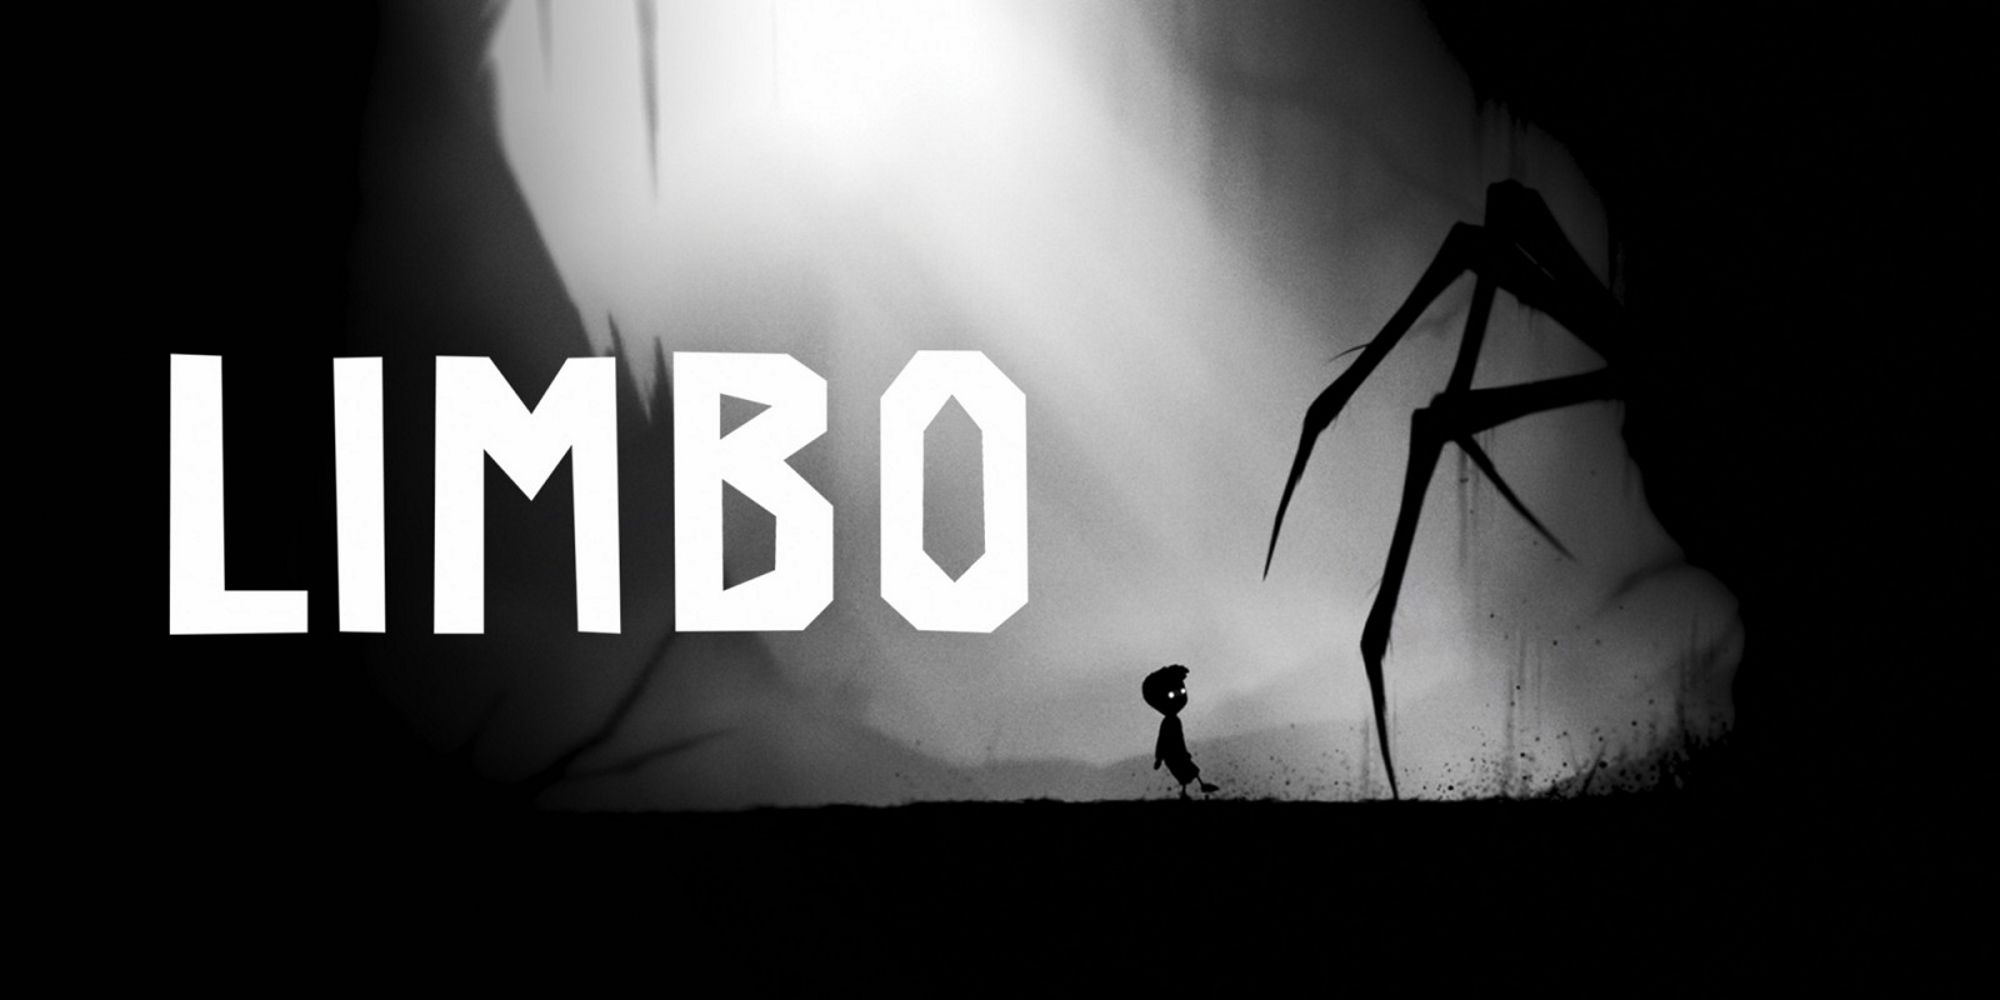 A small child staring at a spider in the form of a shadow in Limbo.